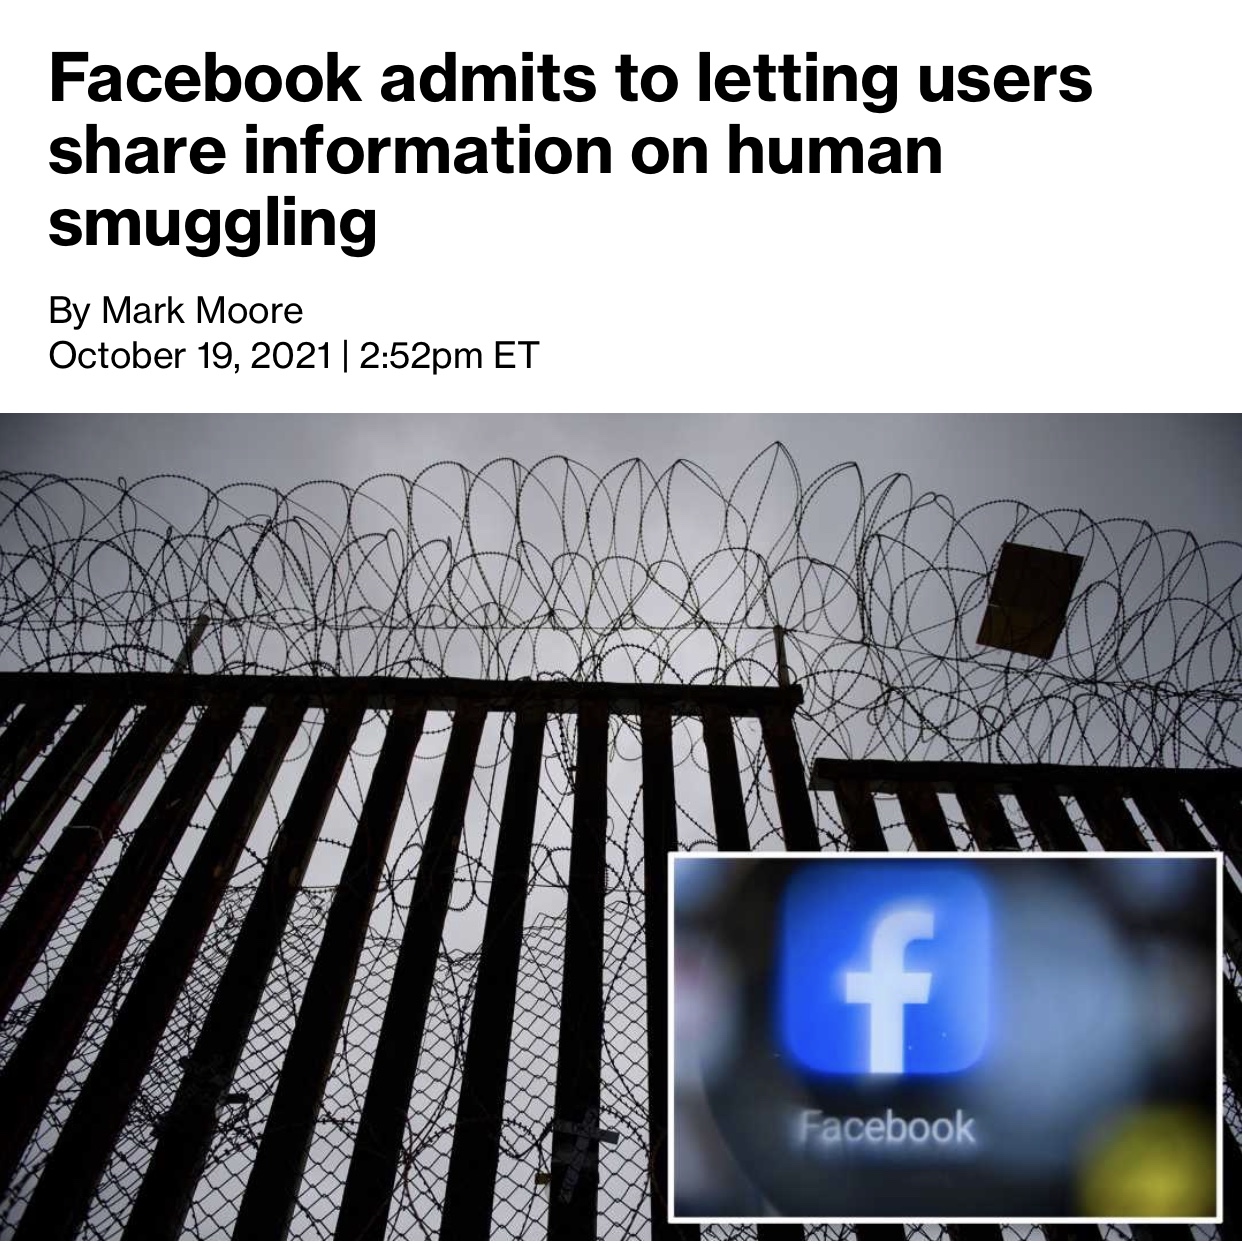 Facebook admits to letting users share information on human smuggling